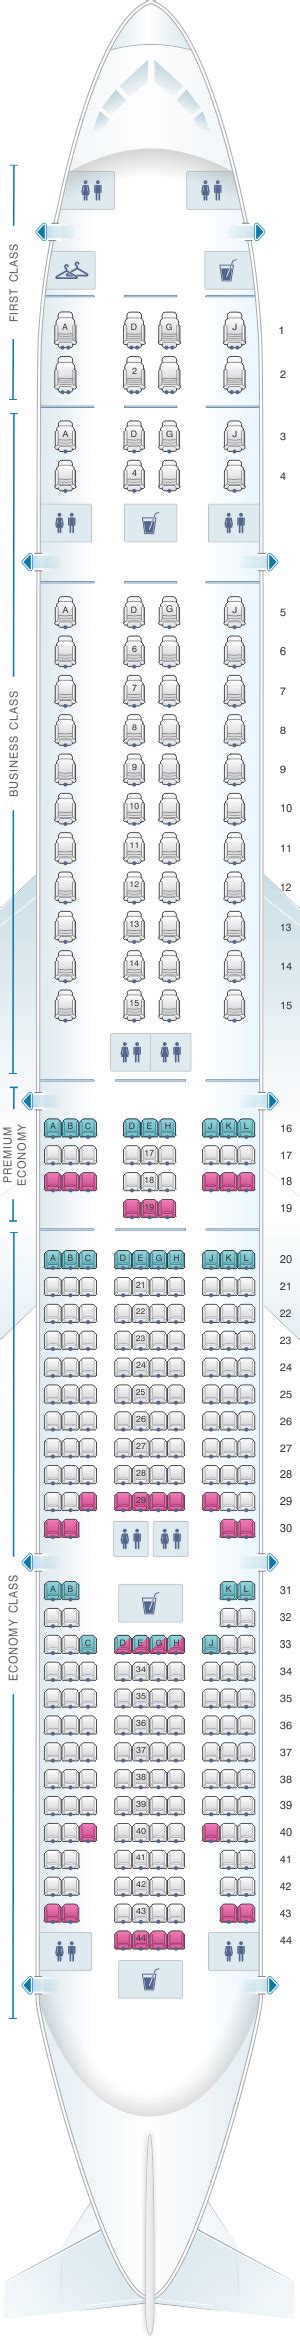 Contact information for 123schleiferei.de - 42L. this seat may have limited recline. this seat is near the lavatory. 43L. this seat has extra legroom. no underseat stowage. no under-seat stowage during takeoff and landing. traytable in armrest means narrower seat. 33K. 